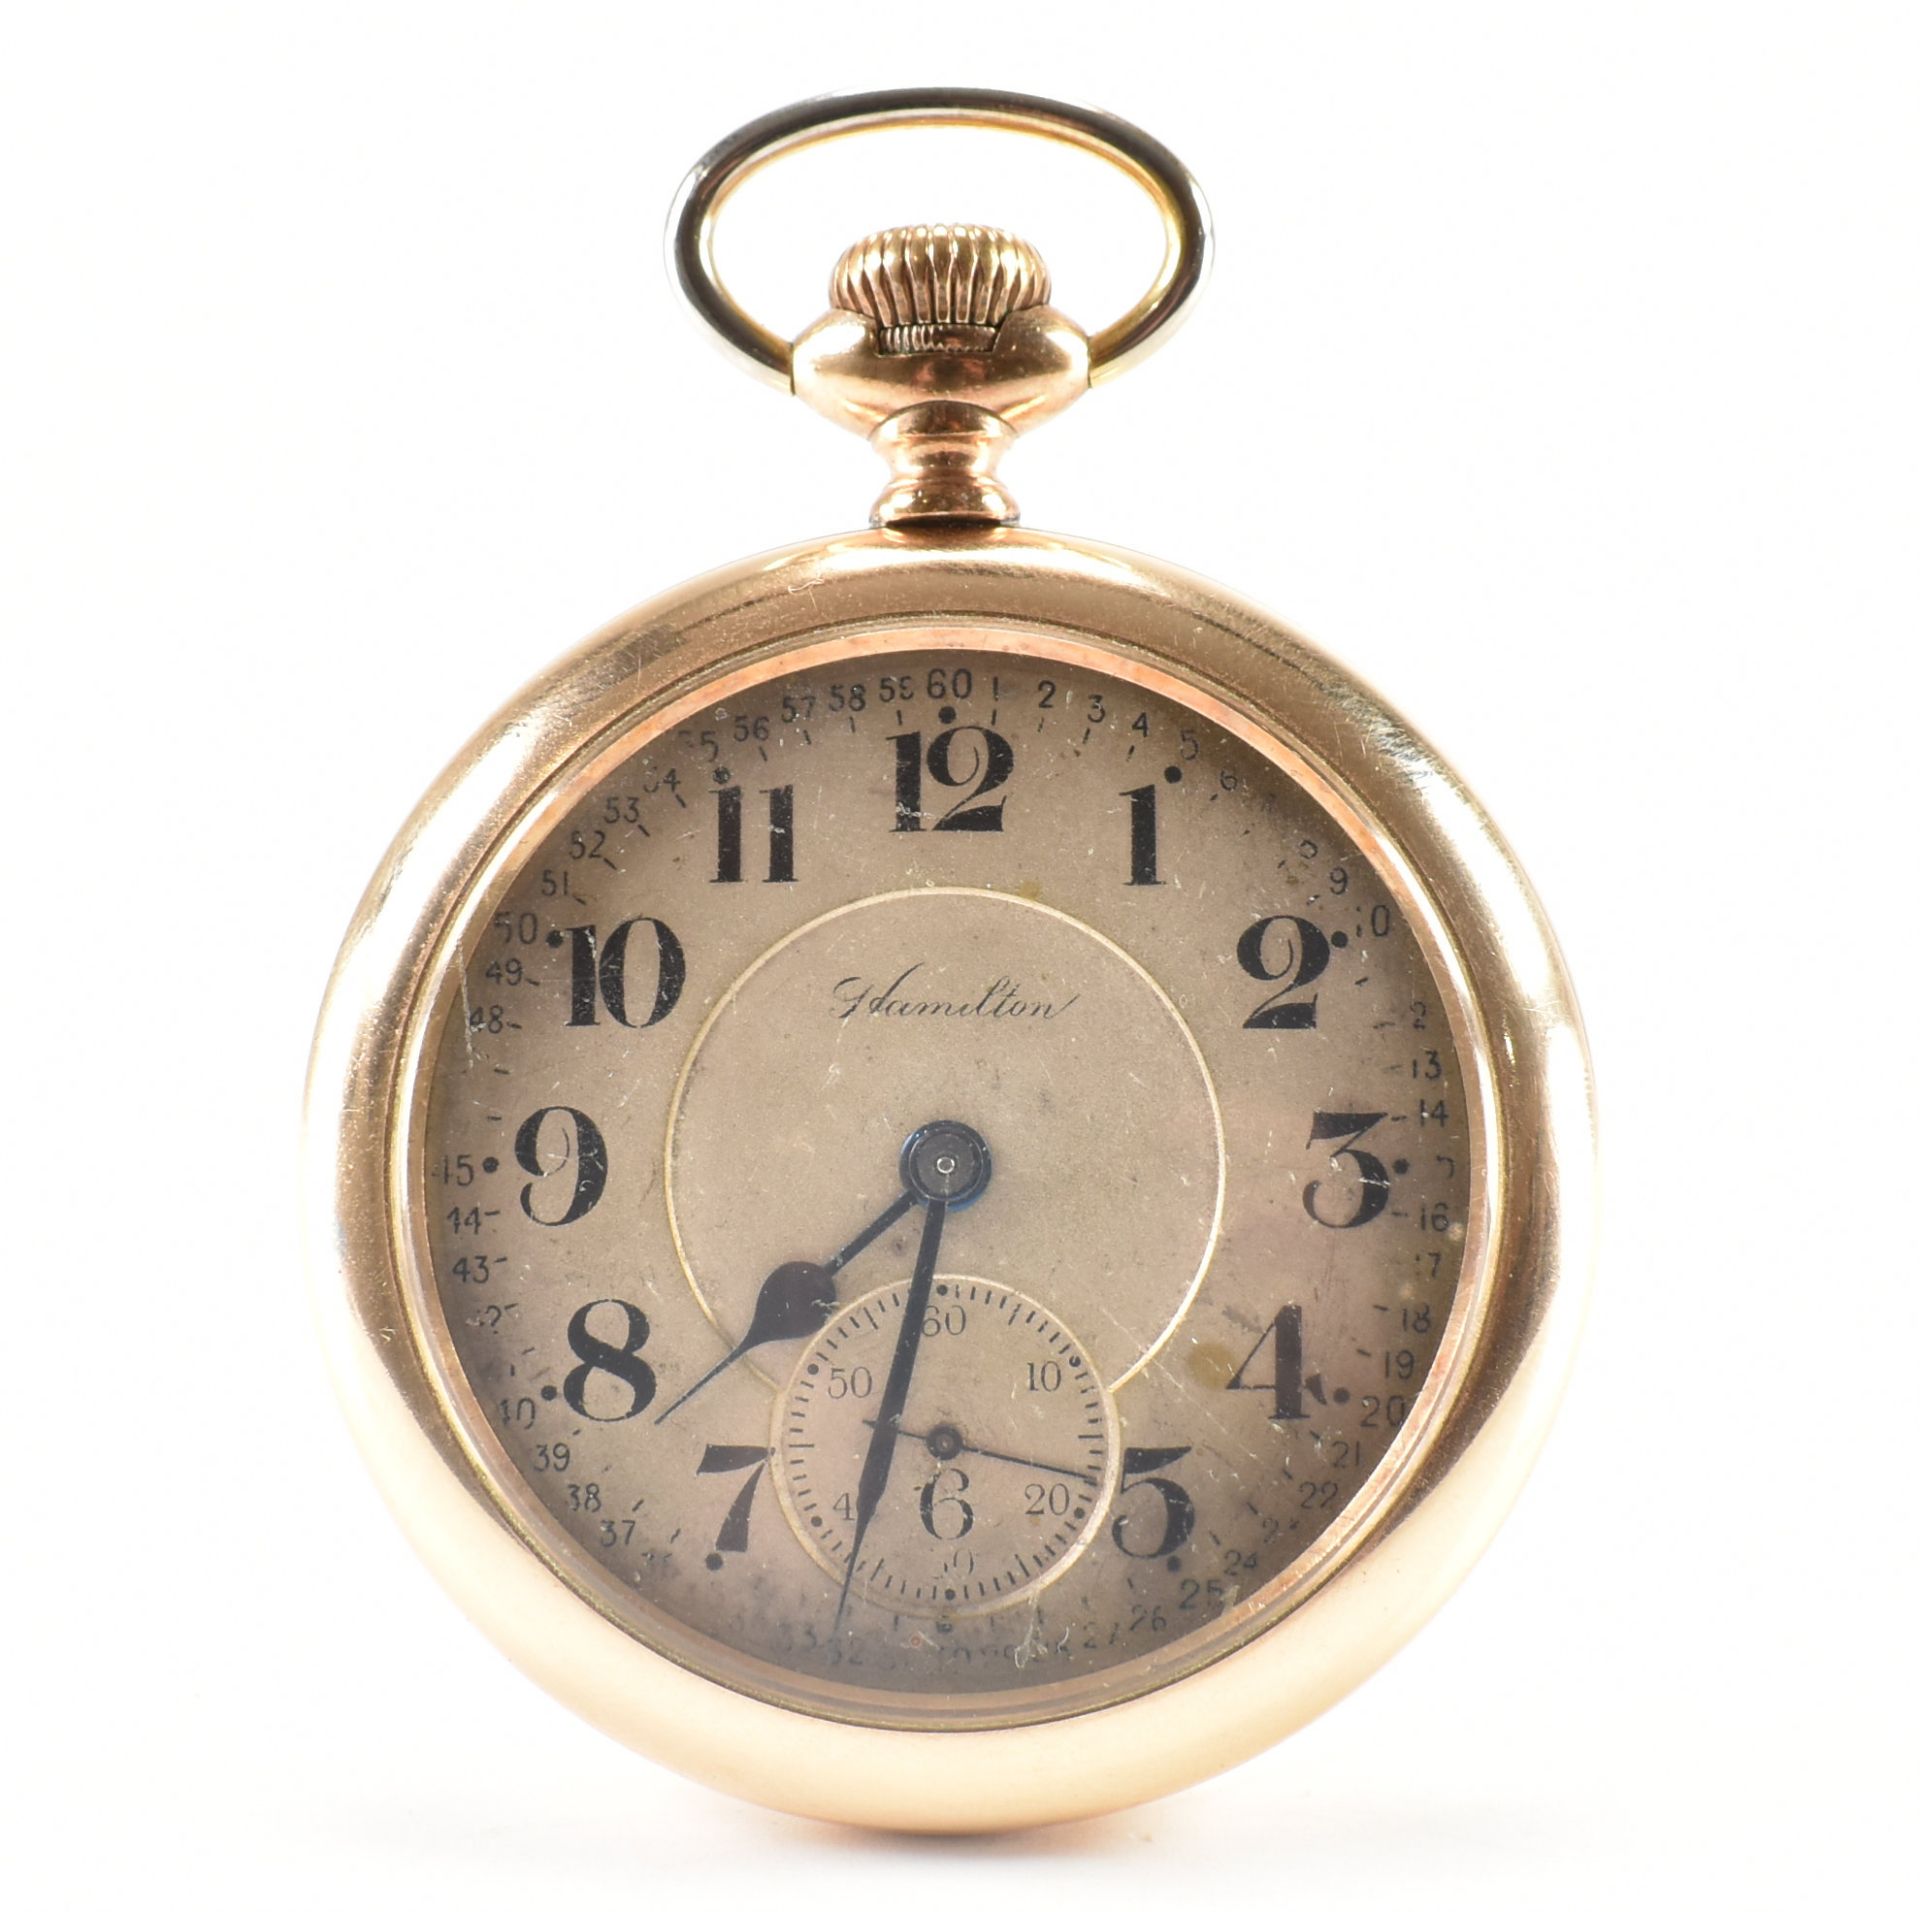 ANTIQUE HAMILTON WATCH COMPANY GOLD PLATED POCKET WATCH